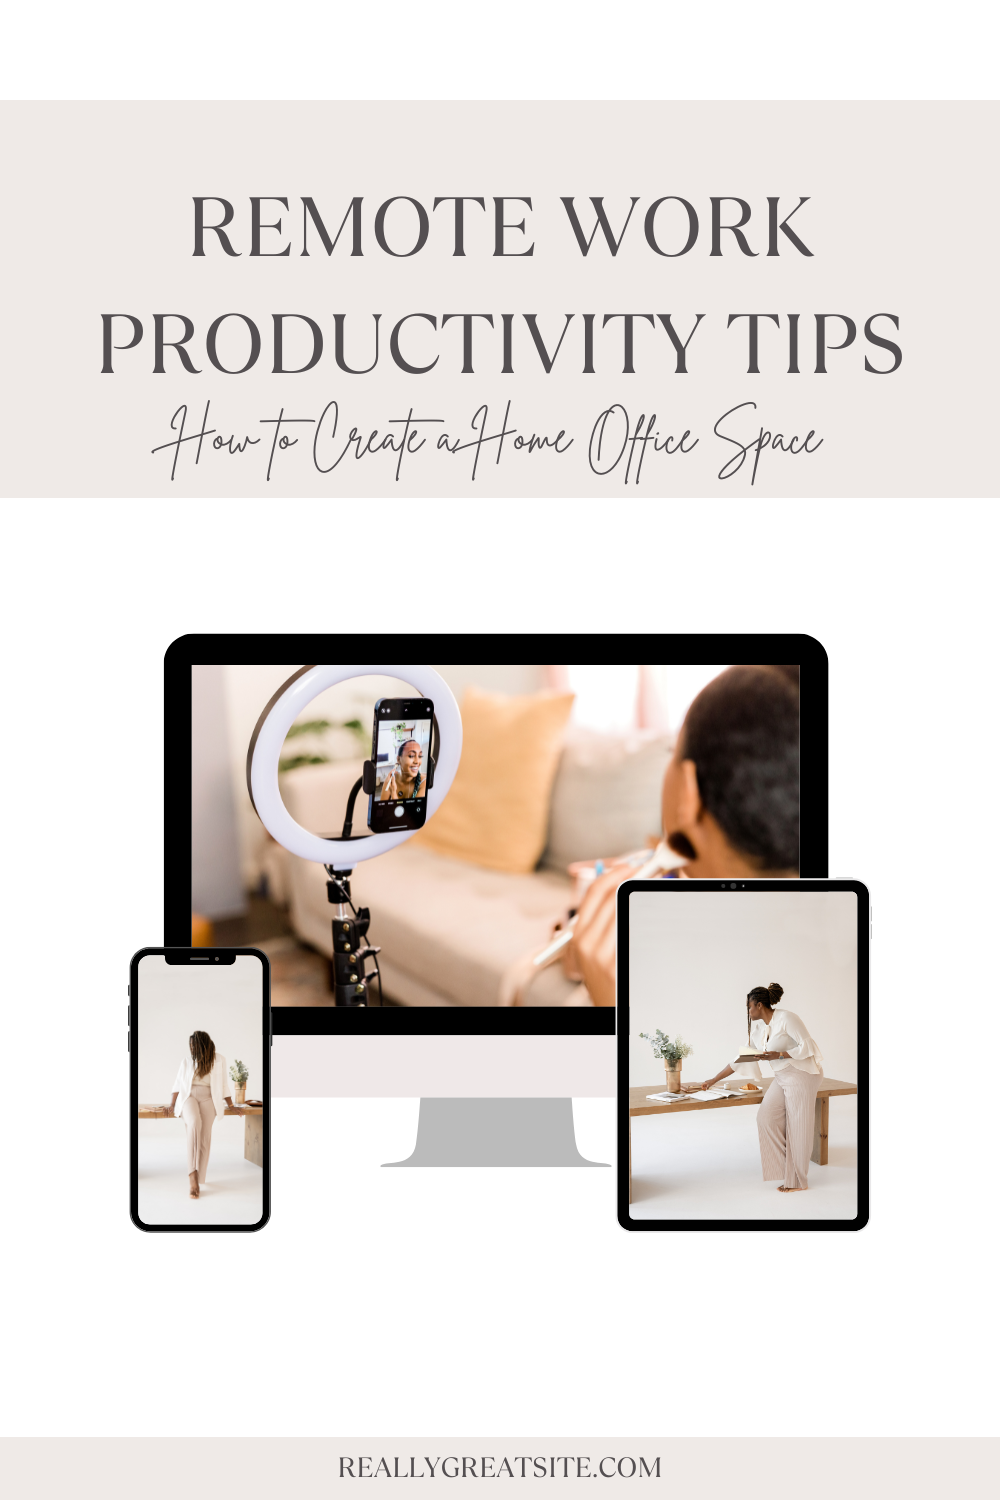 Remote Work Productivity Tips